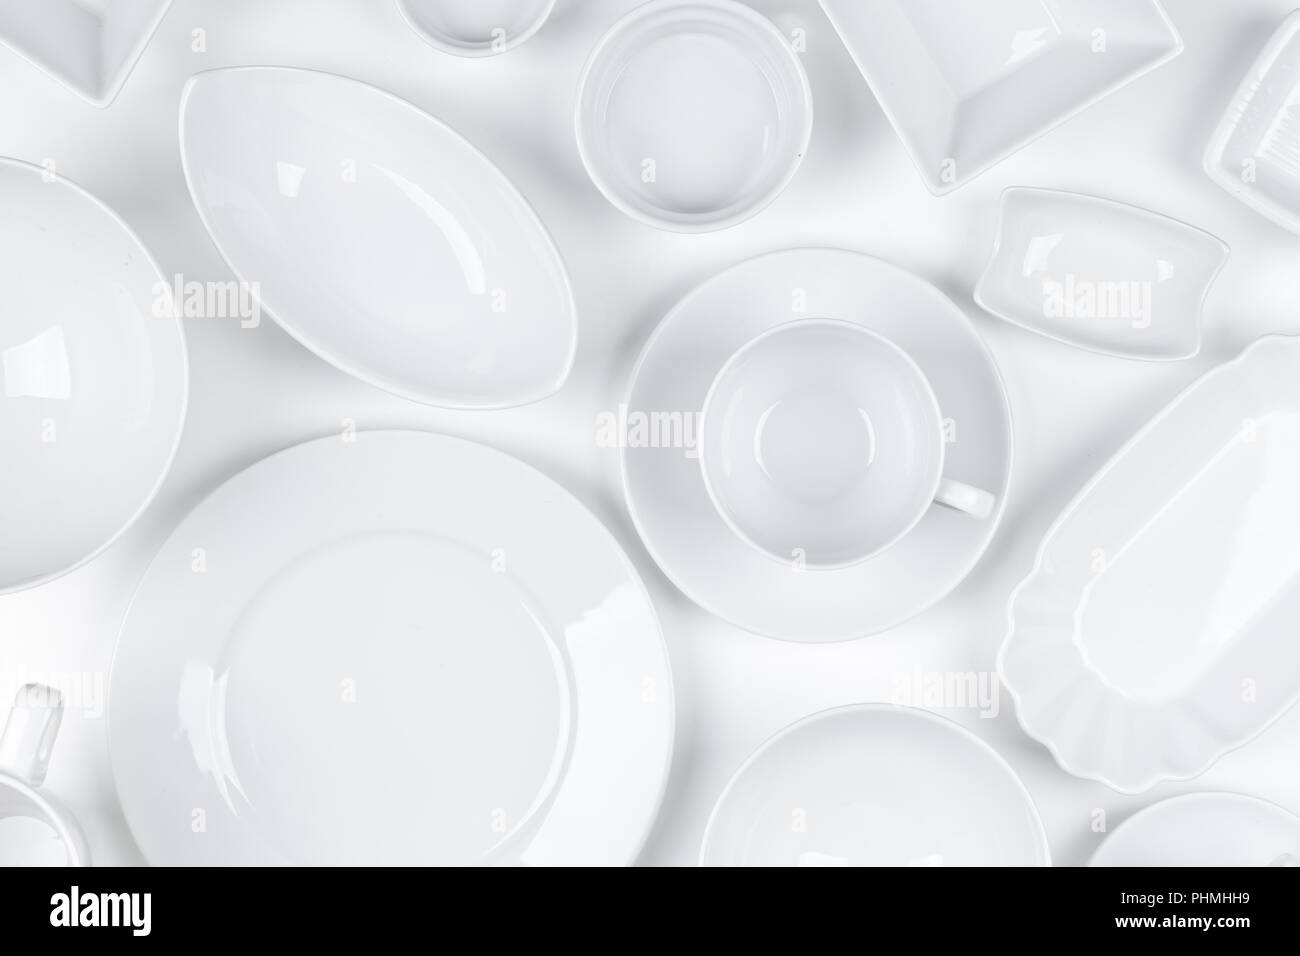 Empty, clean white assorted dishware with plates, cups and bowls white background Stock Photo